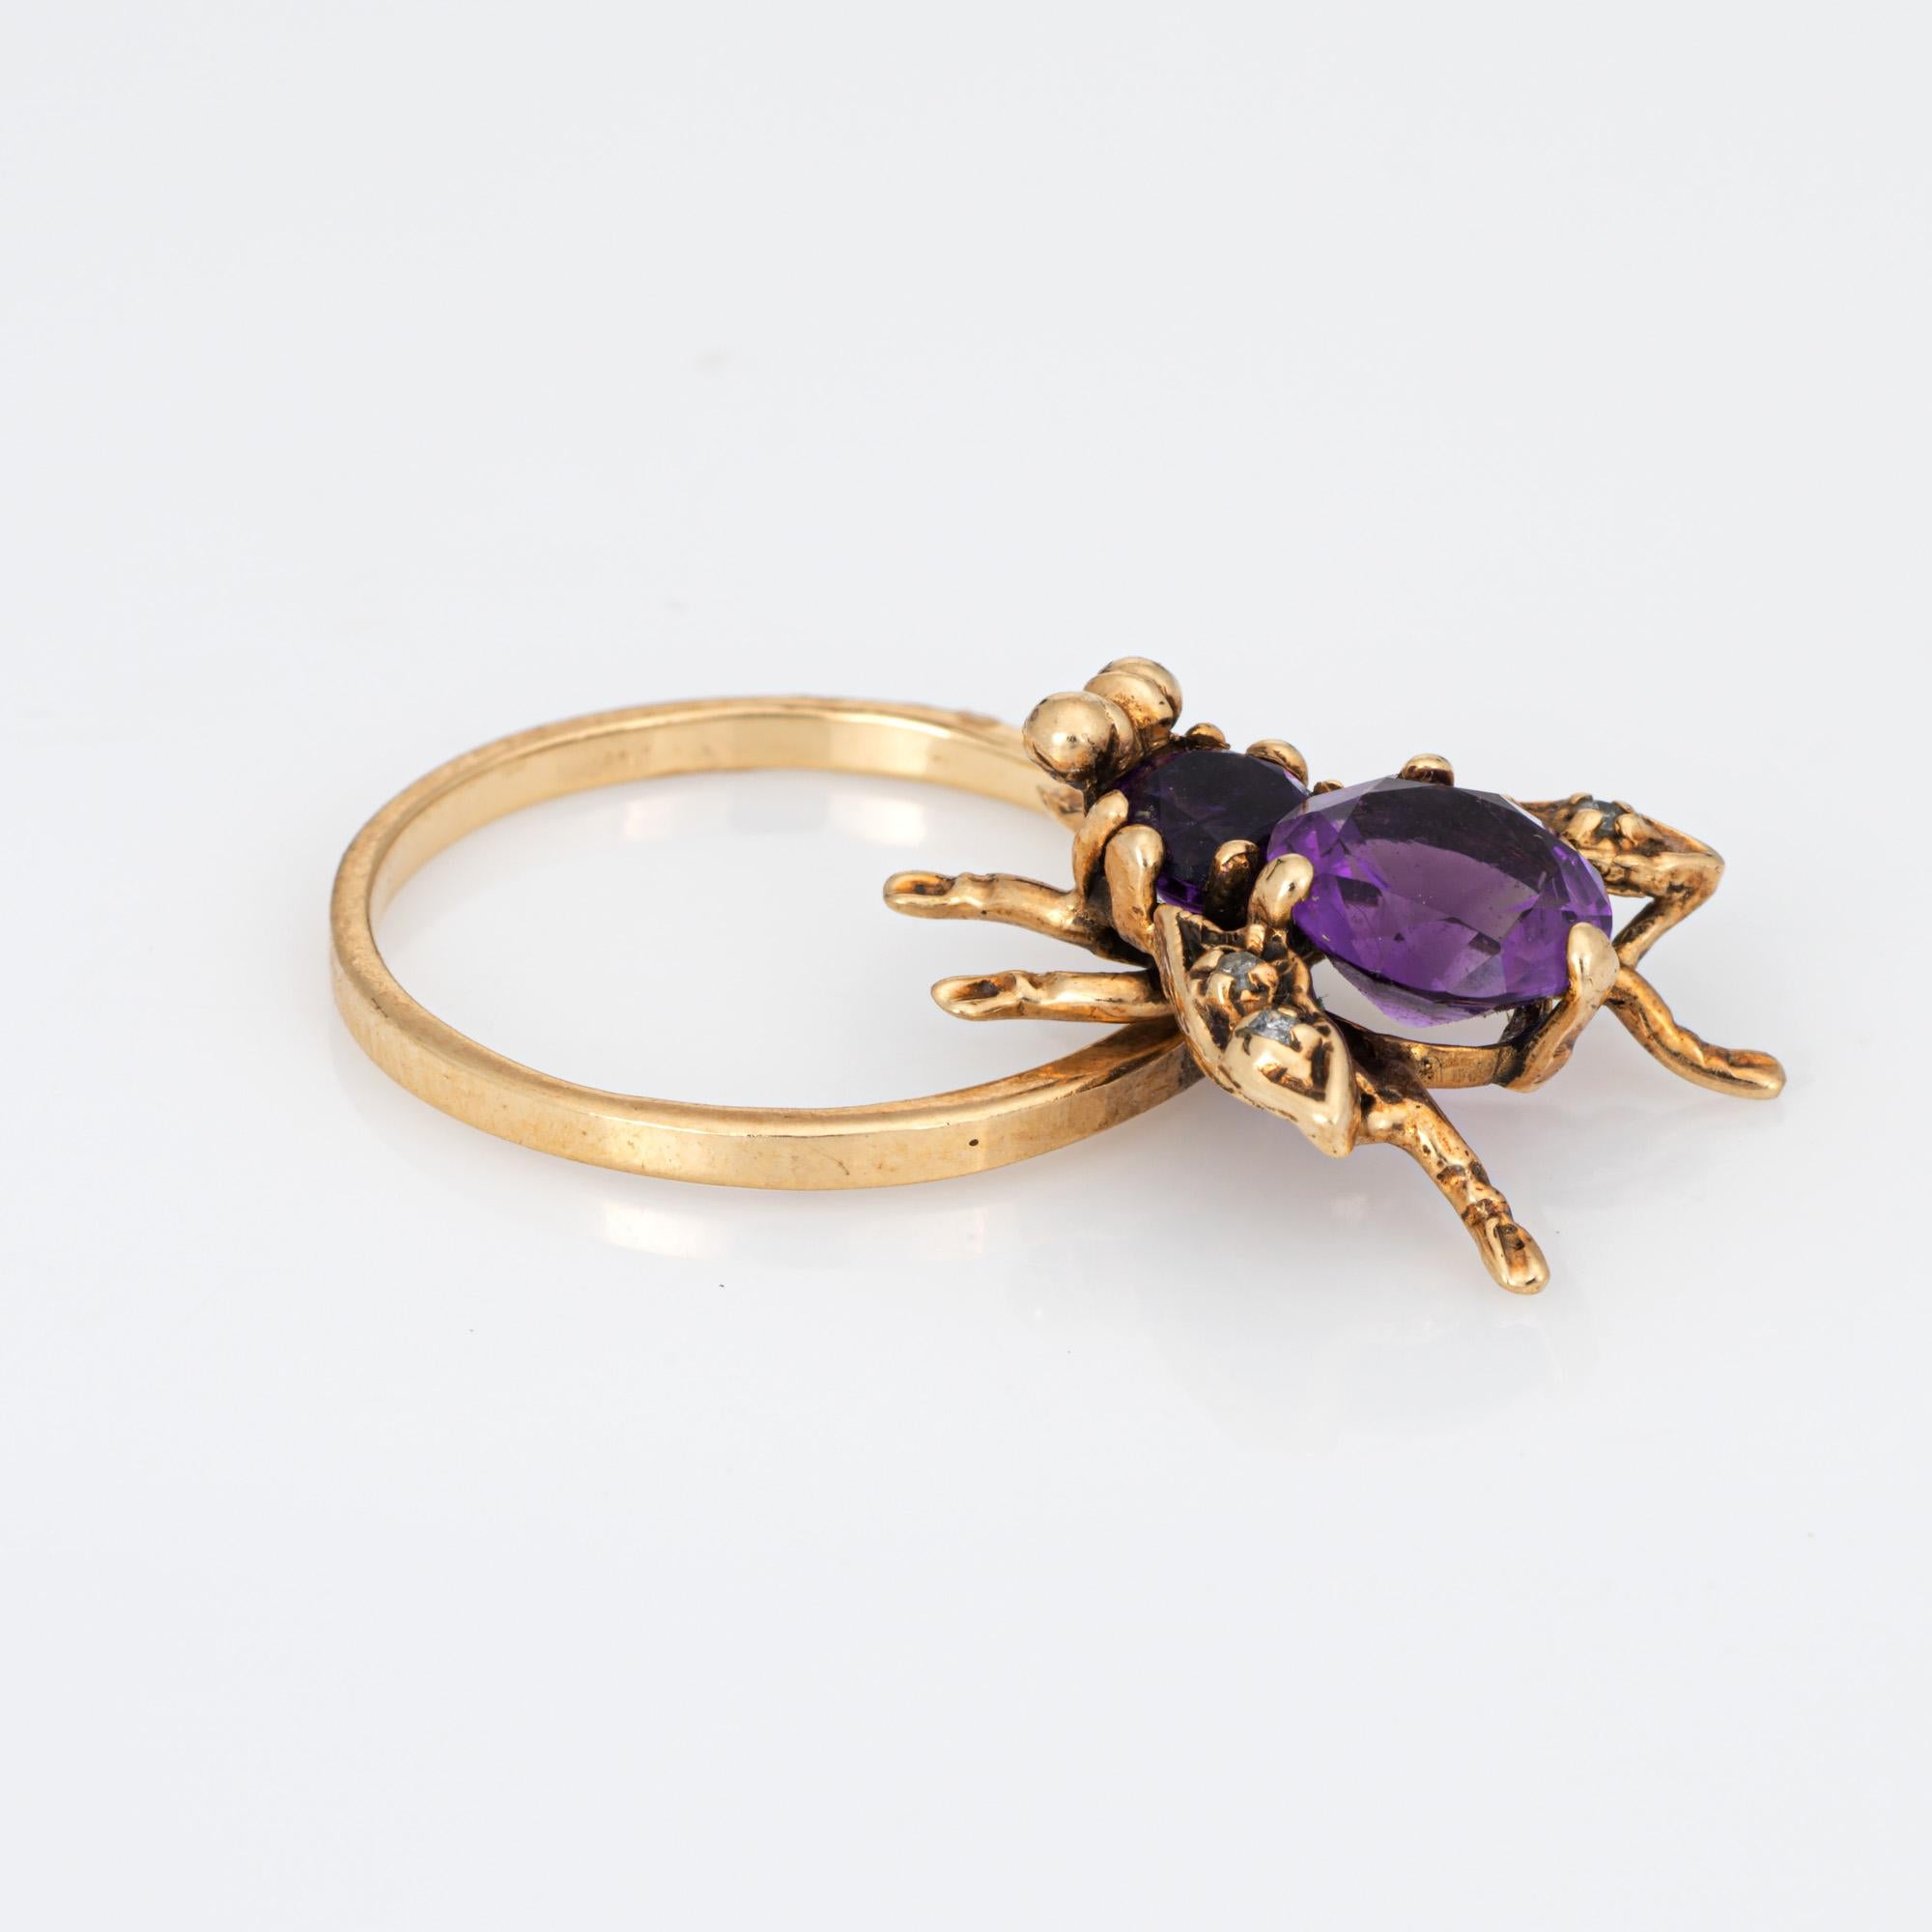 Stylish vintage amethyst & diamond insect ring (circa 1960s to 1970s) crafted in 14 karat yellow gold. 

Faceted round cut amethyst measures 7mm with the smaller amethyst measuring 4.5mm. Four small diamonds are set into the wings totaling an